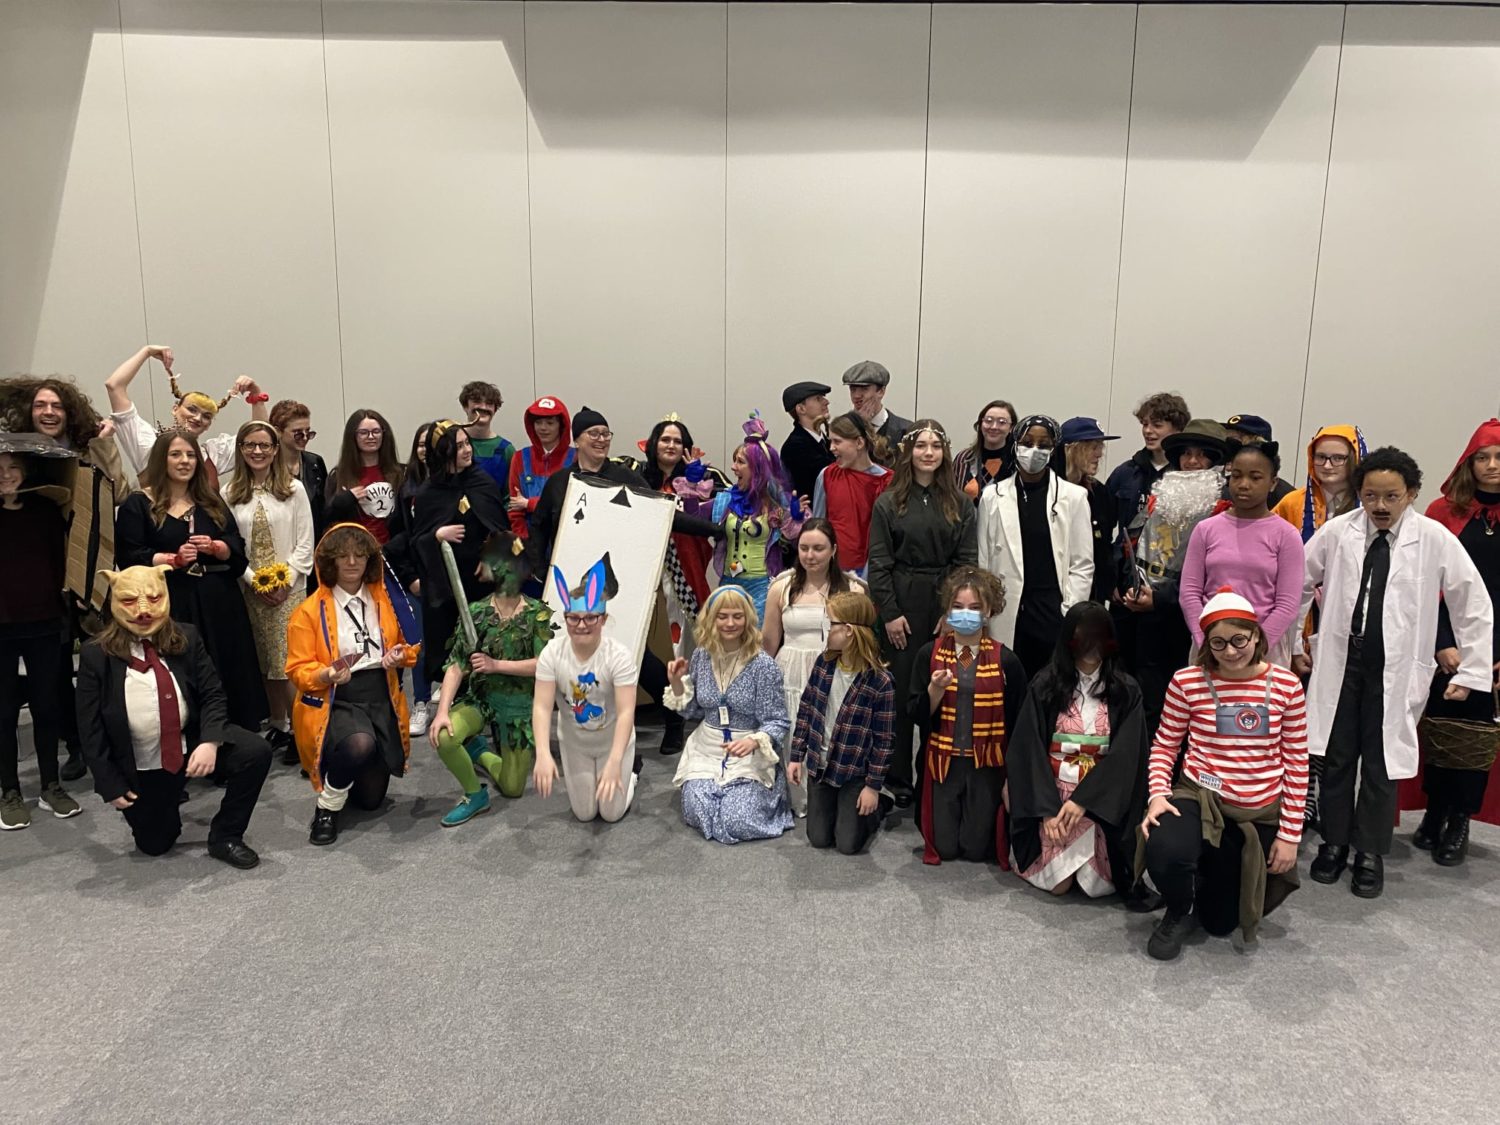 A large group of LAB students are pictured posing for the camera together, wearing their fancy dress outfits for World Book Day 2022.